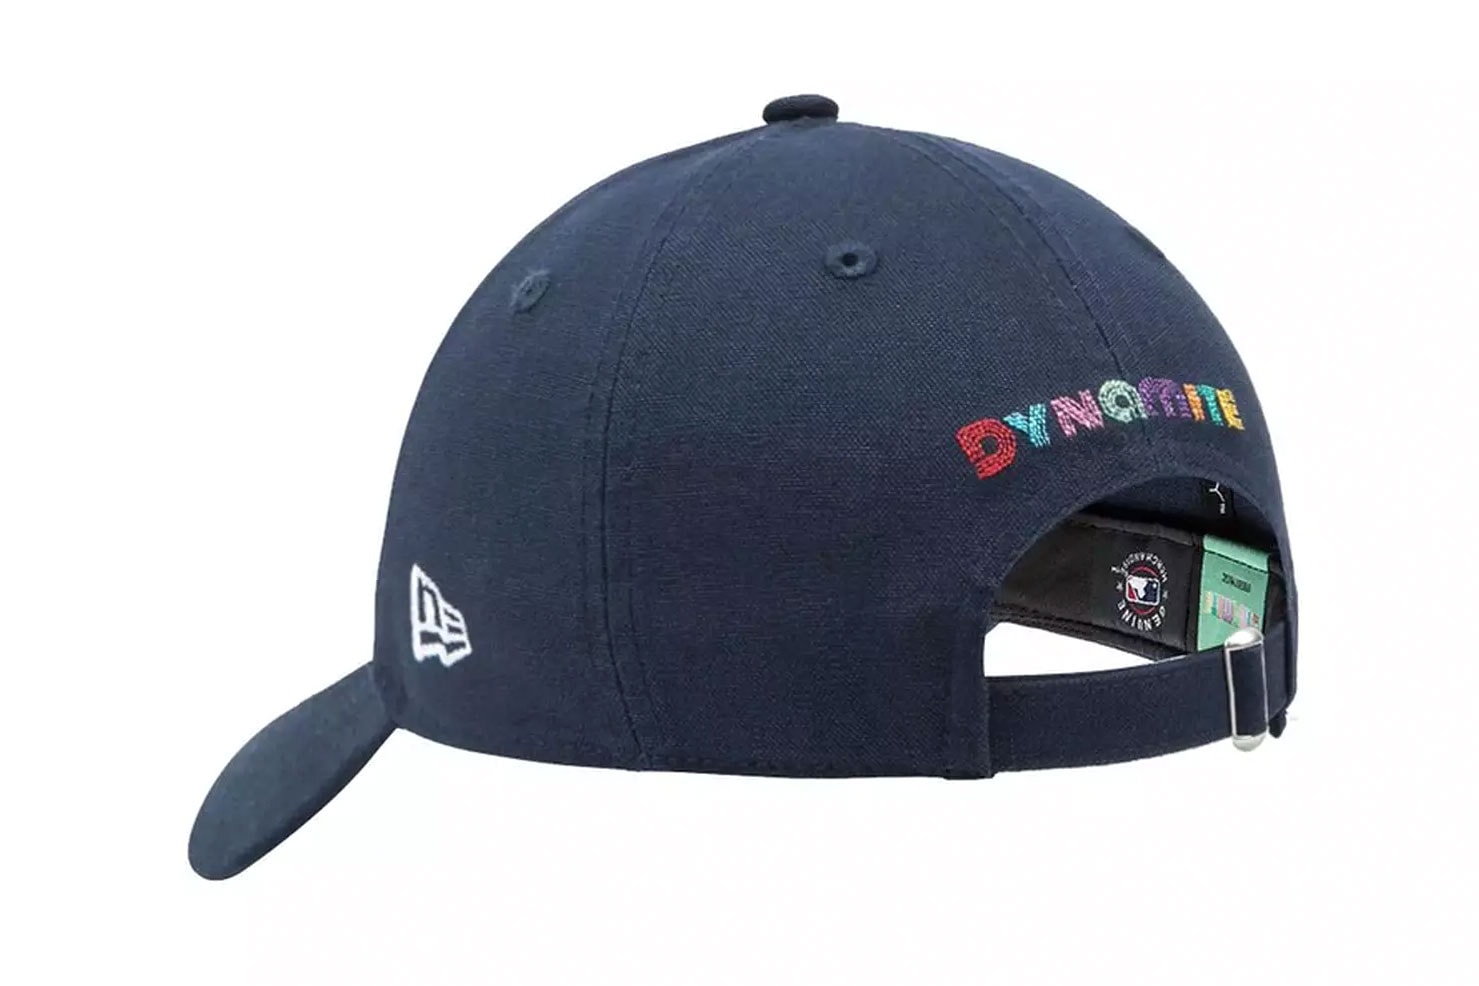 BTS x MLB x New Era® のトリプルコラボコレクションが発表 BTS Reveals Three-Way Collaboration With MLB and New Era Offering album themed Yankees Red Sox Dodgers gear t shirt cap bucket hat butter dynamite black swan release info date price 